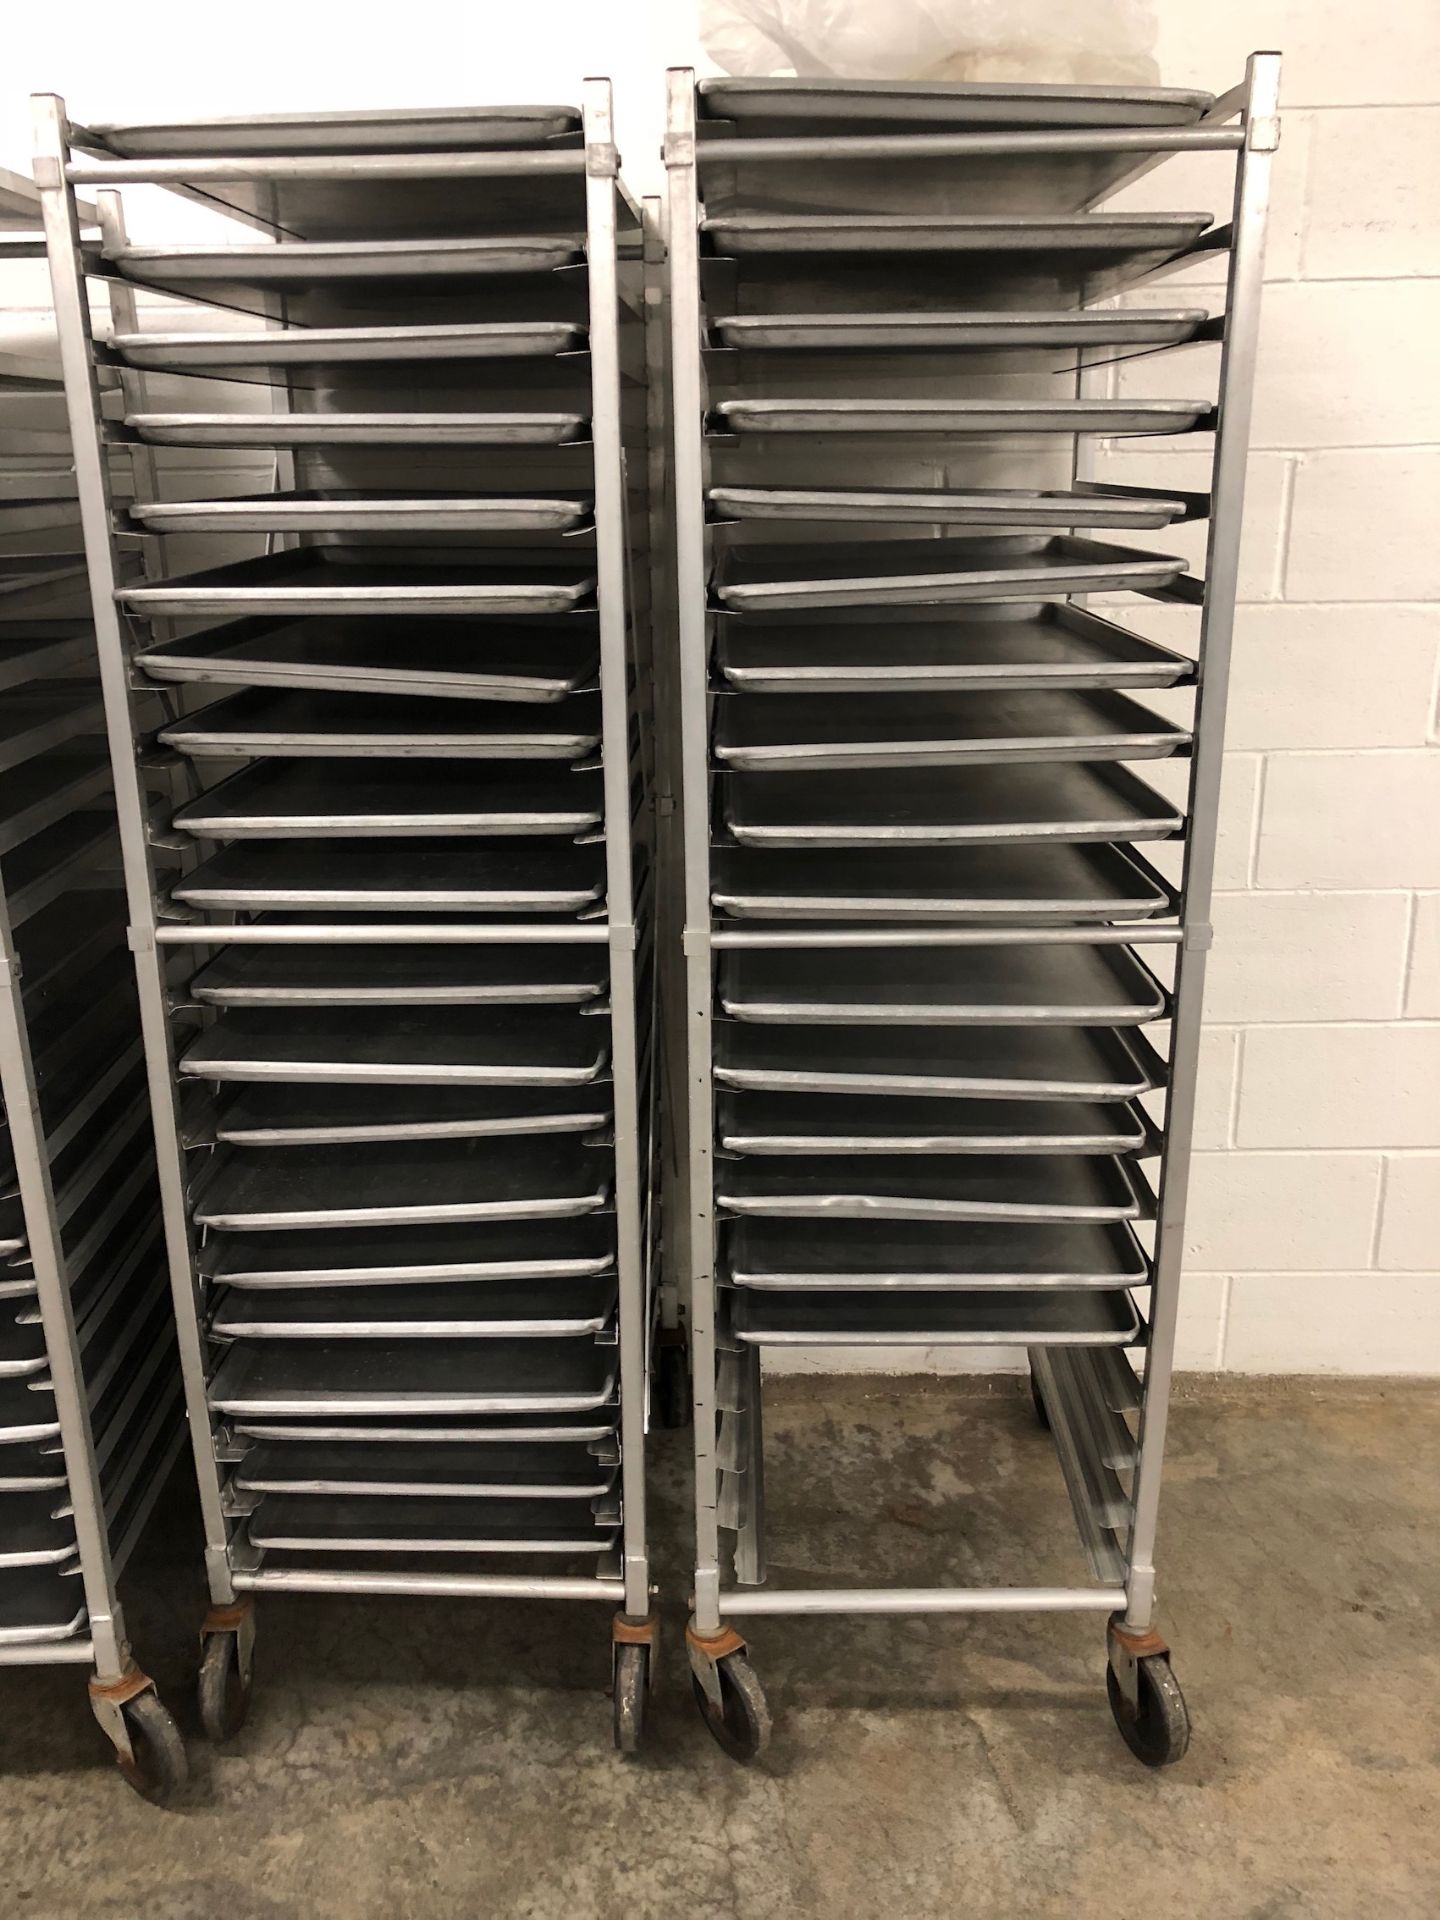 (2) Channel Approximately 64” Tall Tray Racks, Mounted on Casters, 20 Tray Capacity